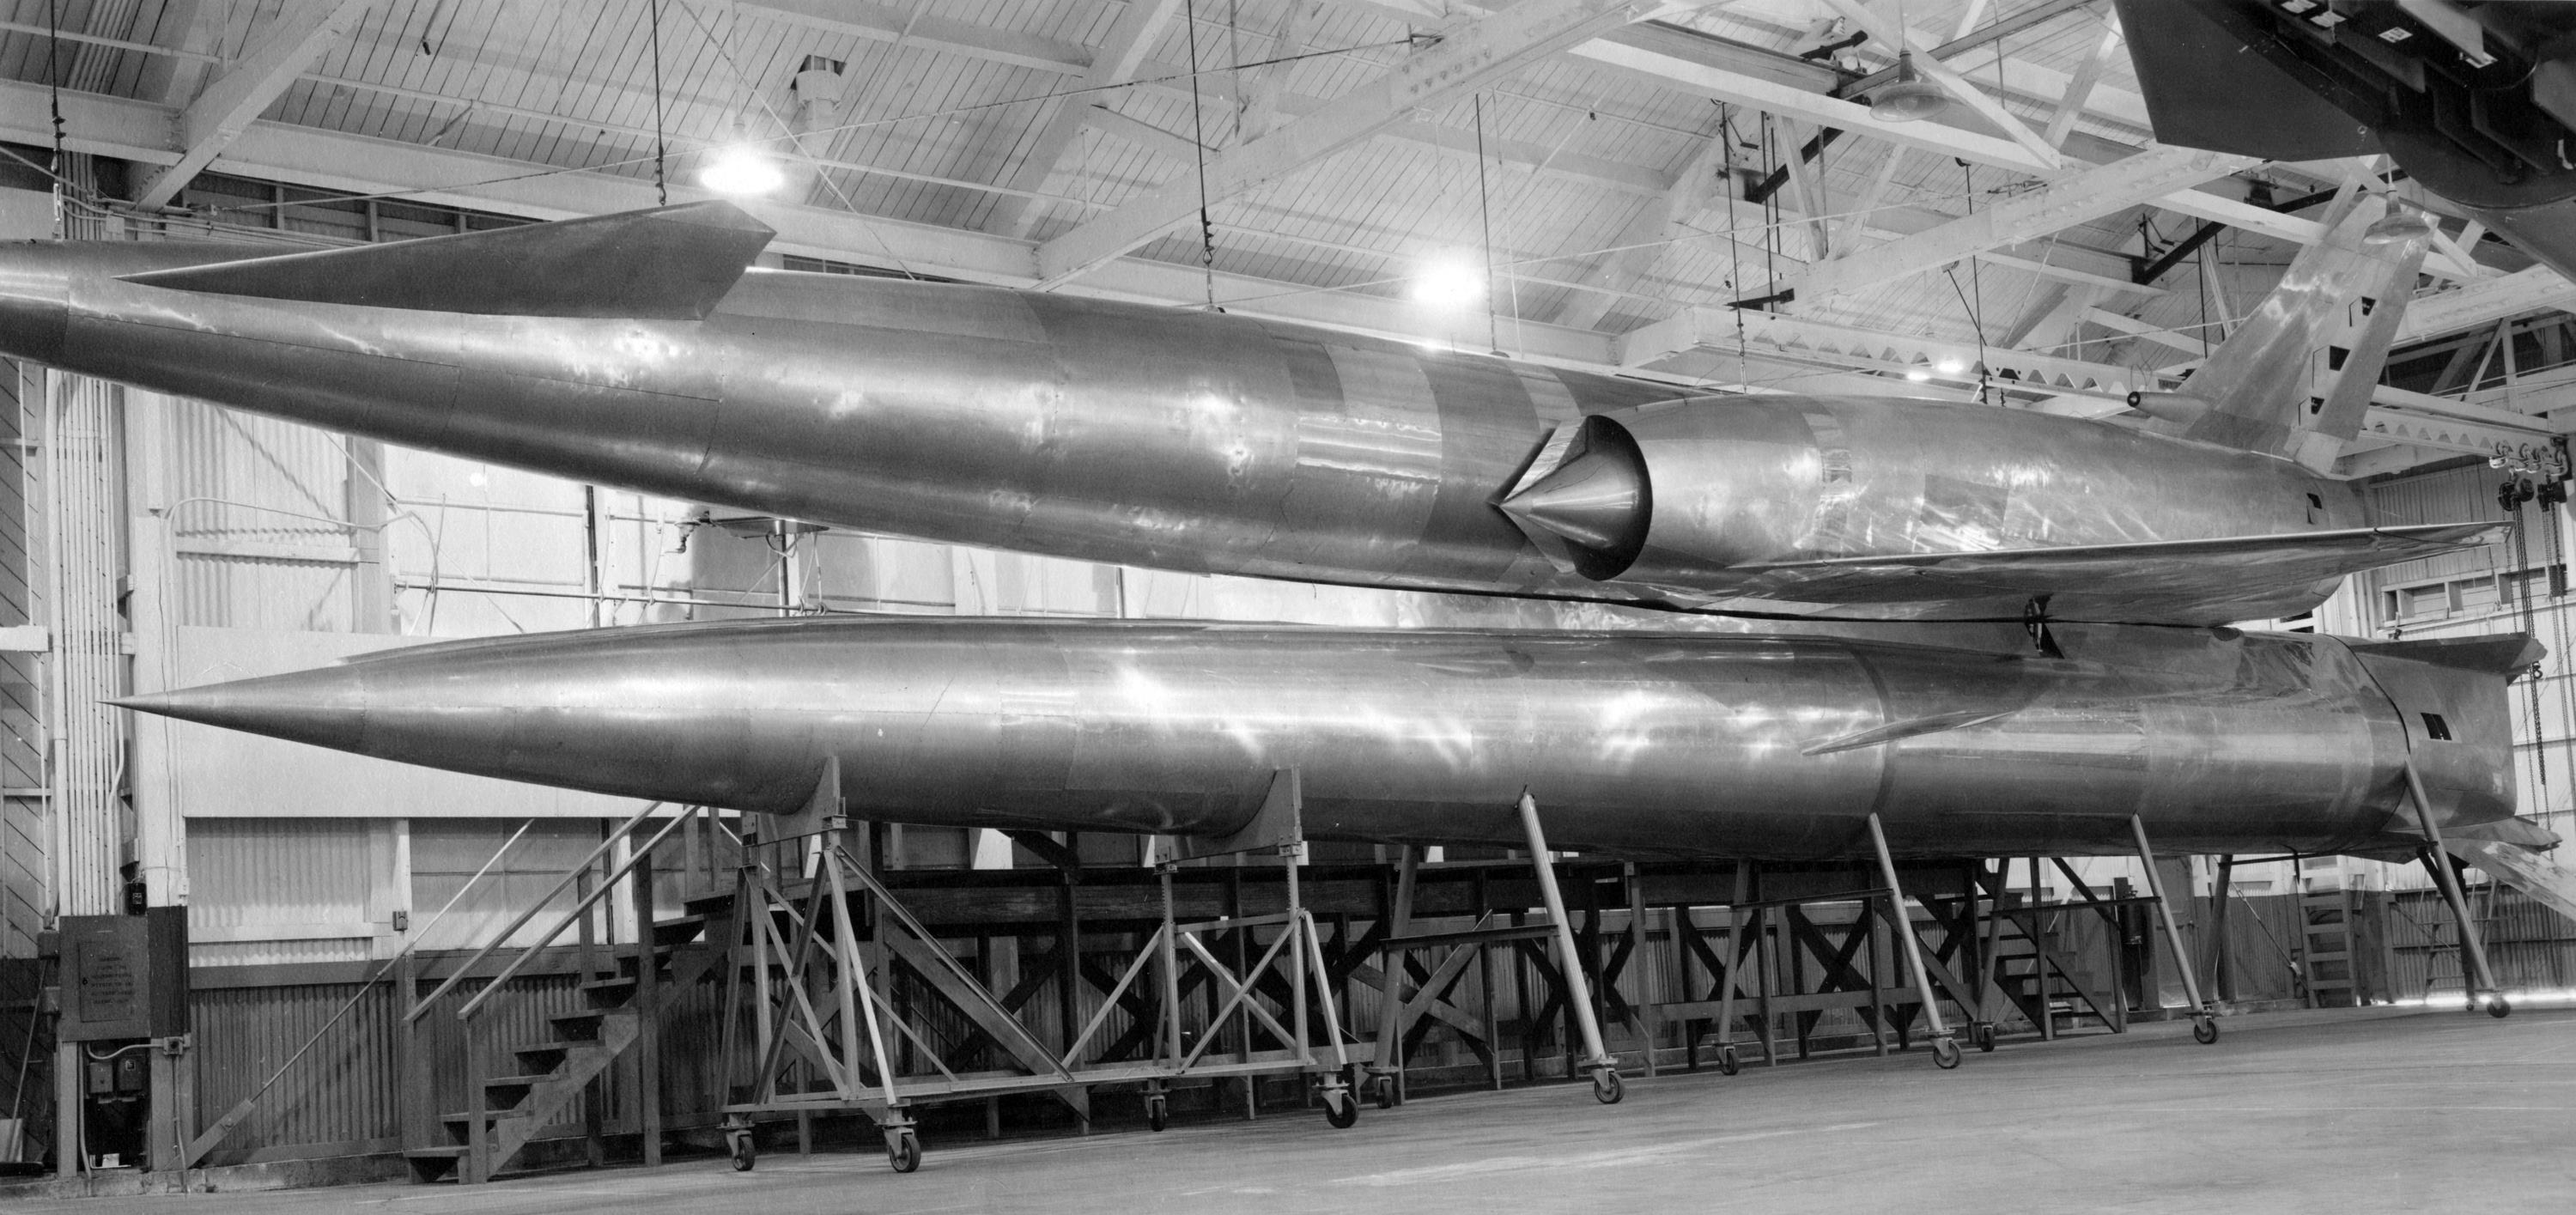 Prior to constructing the first XSM-64, North American constructed a full-scale metal mock-up to verify overall design.